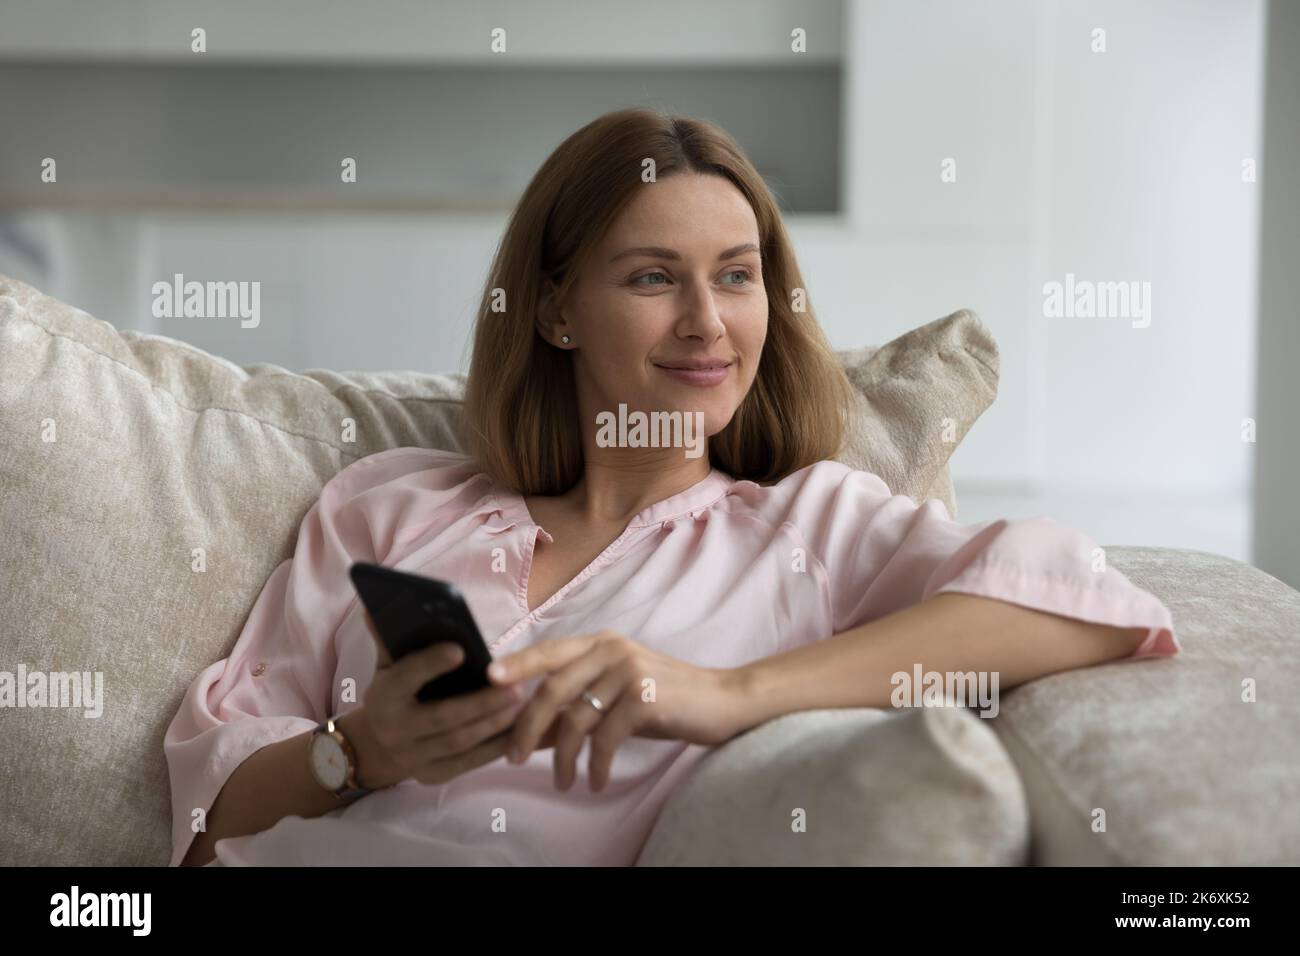 Woman looks aside sits on sofa with smartphone in hands Stock Photo